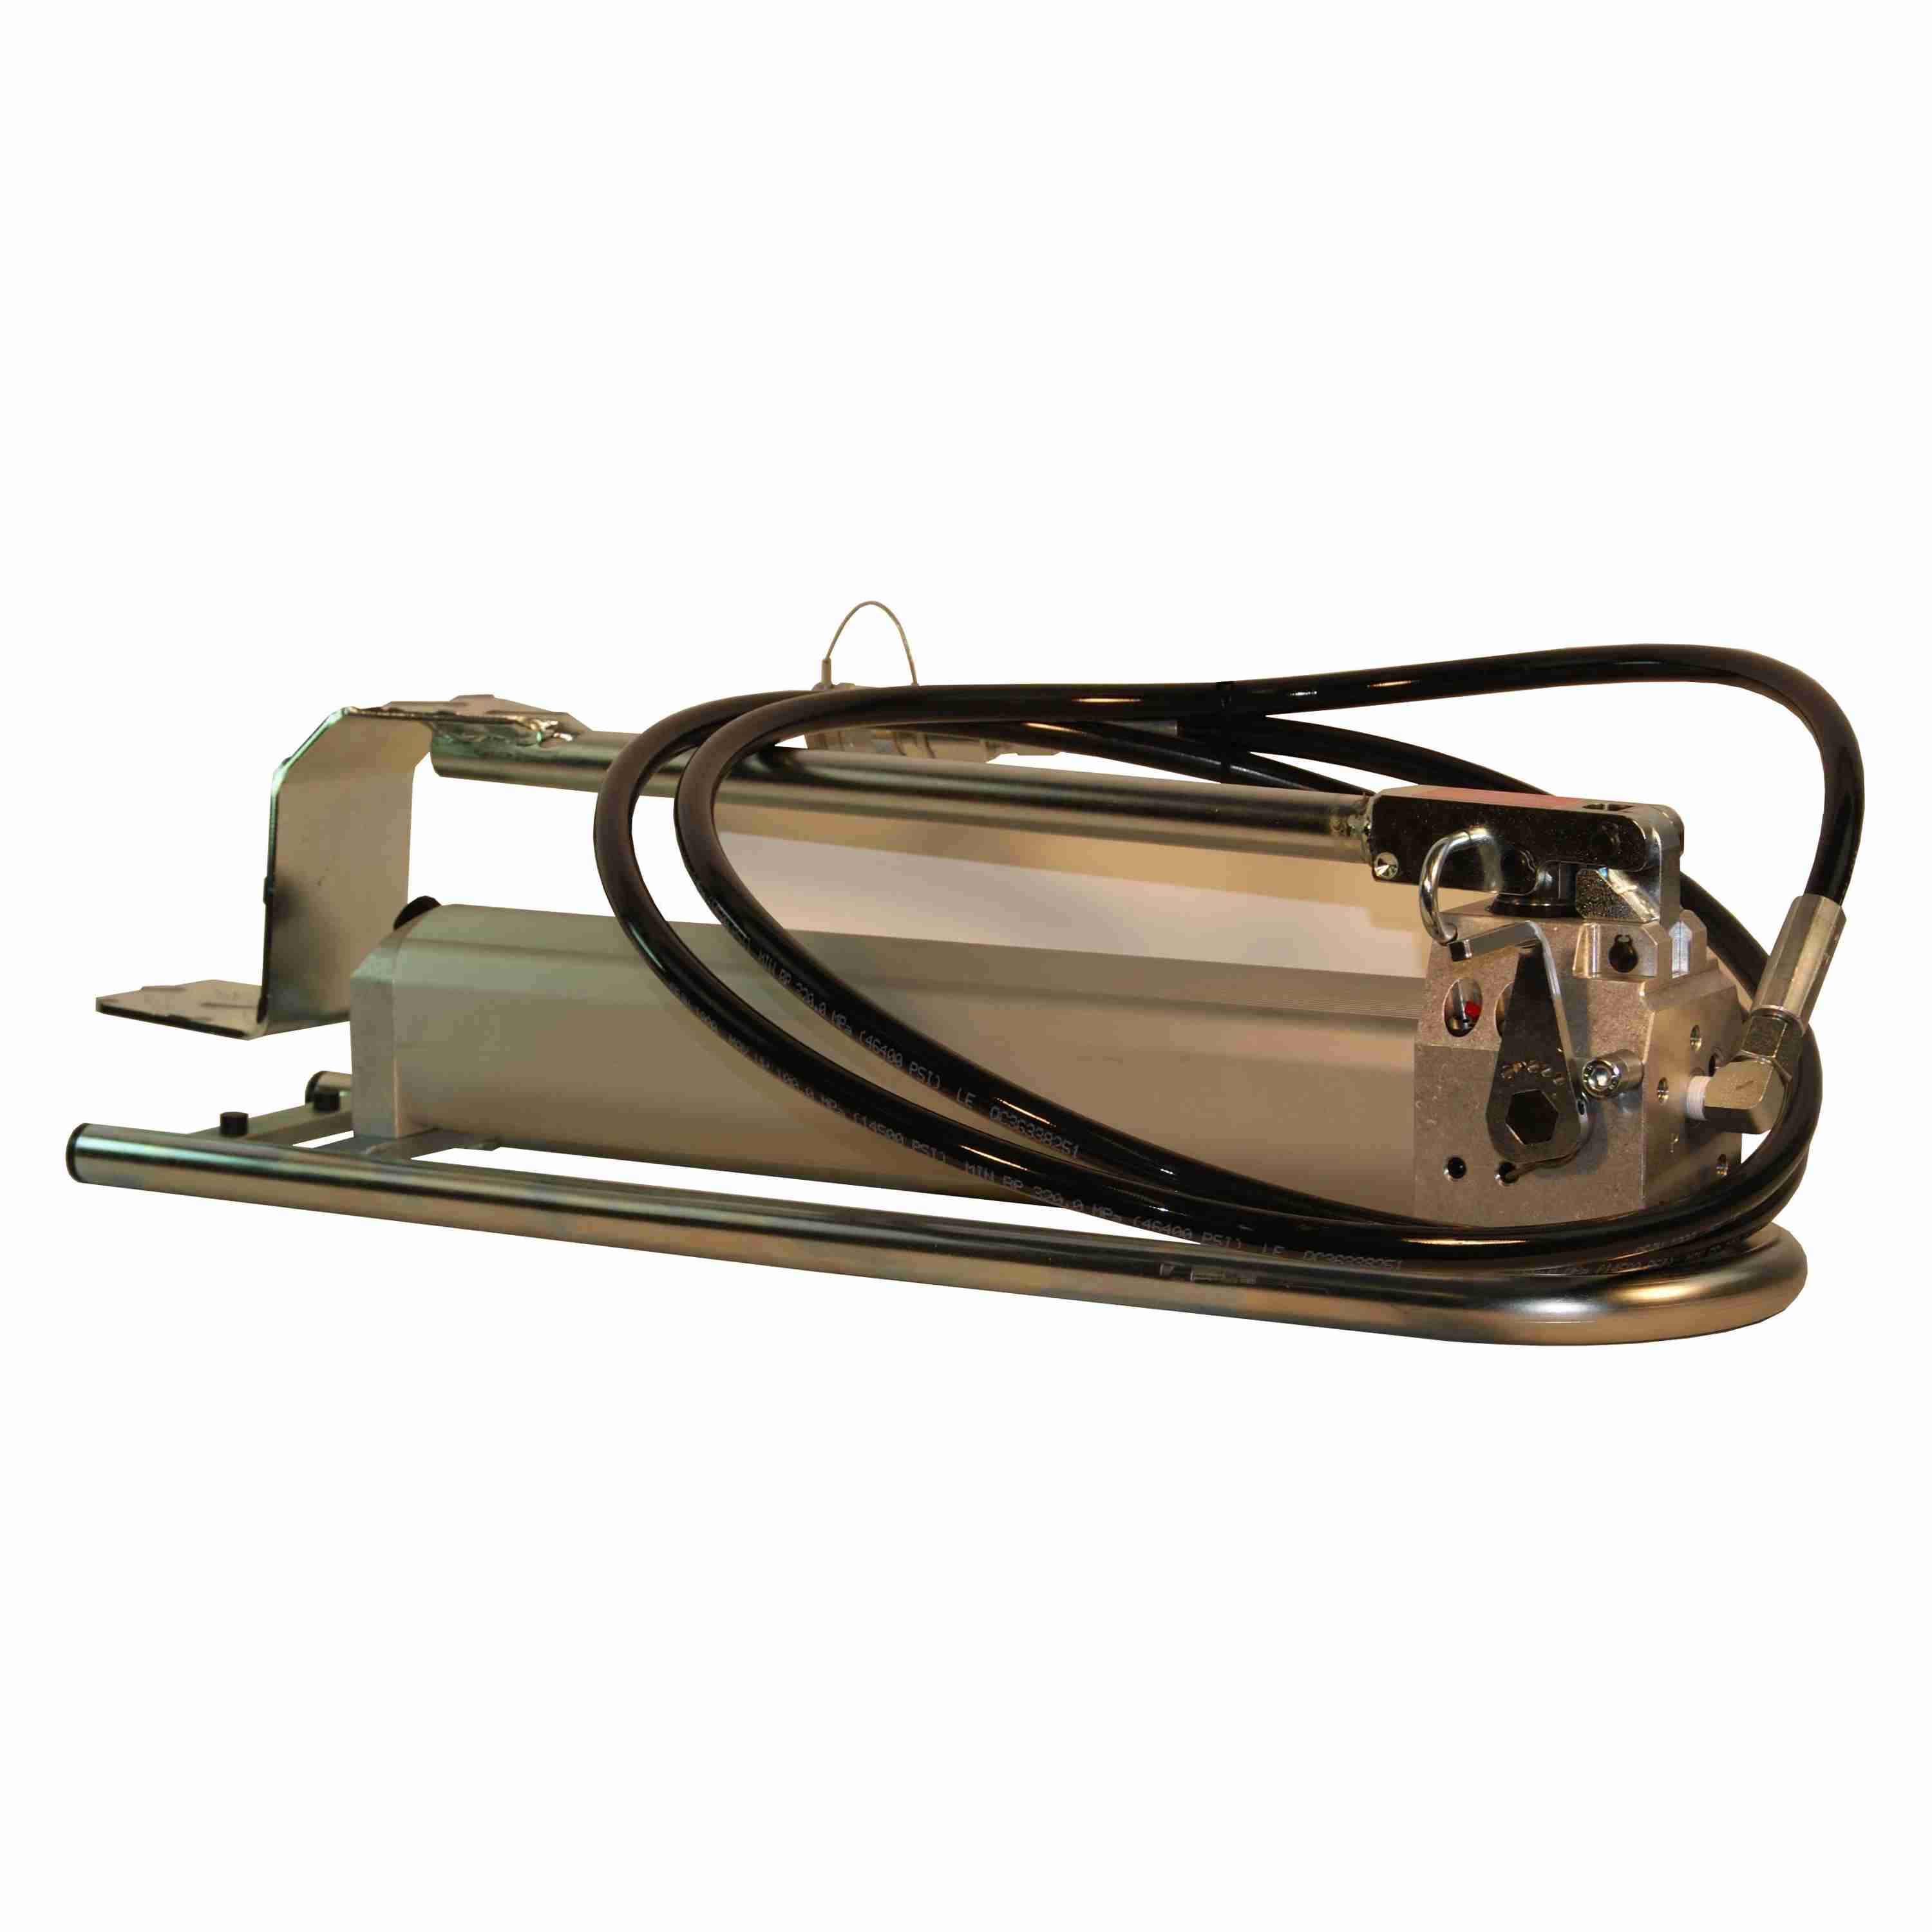 FHP2 - Hydraulic foot pump for single-acting tools